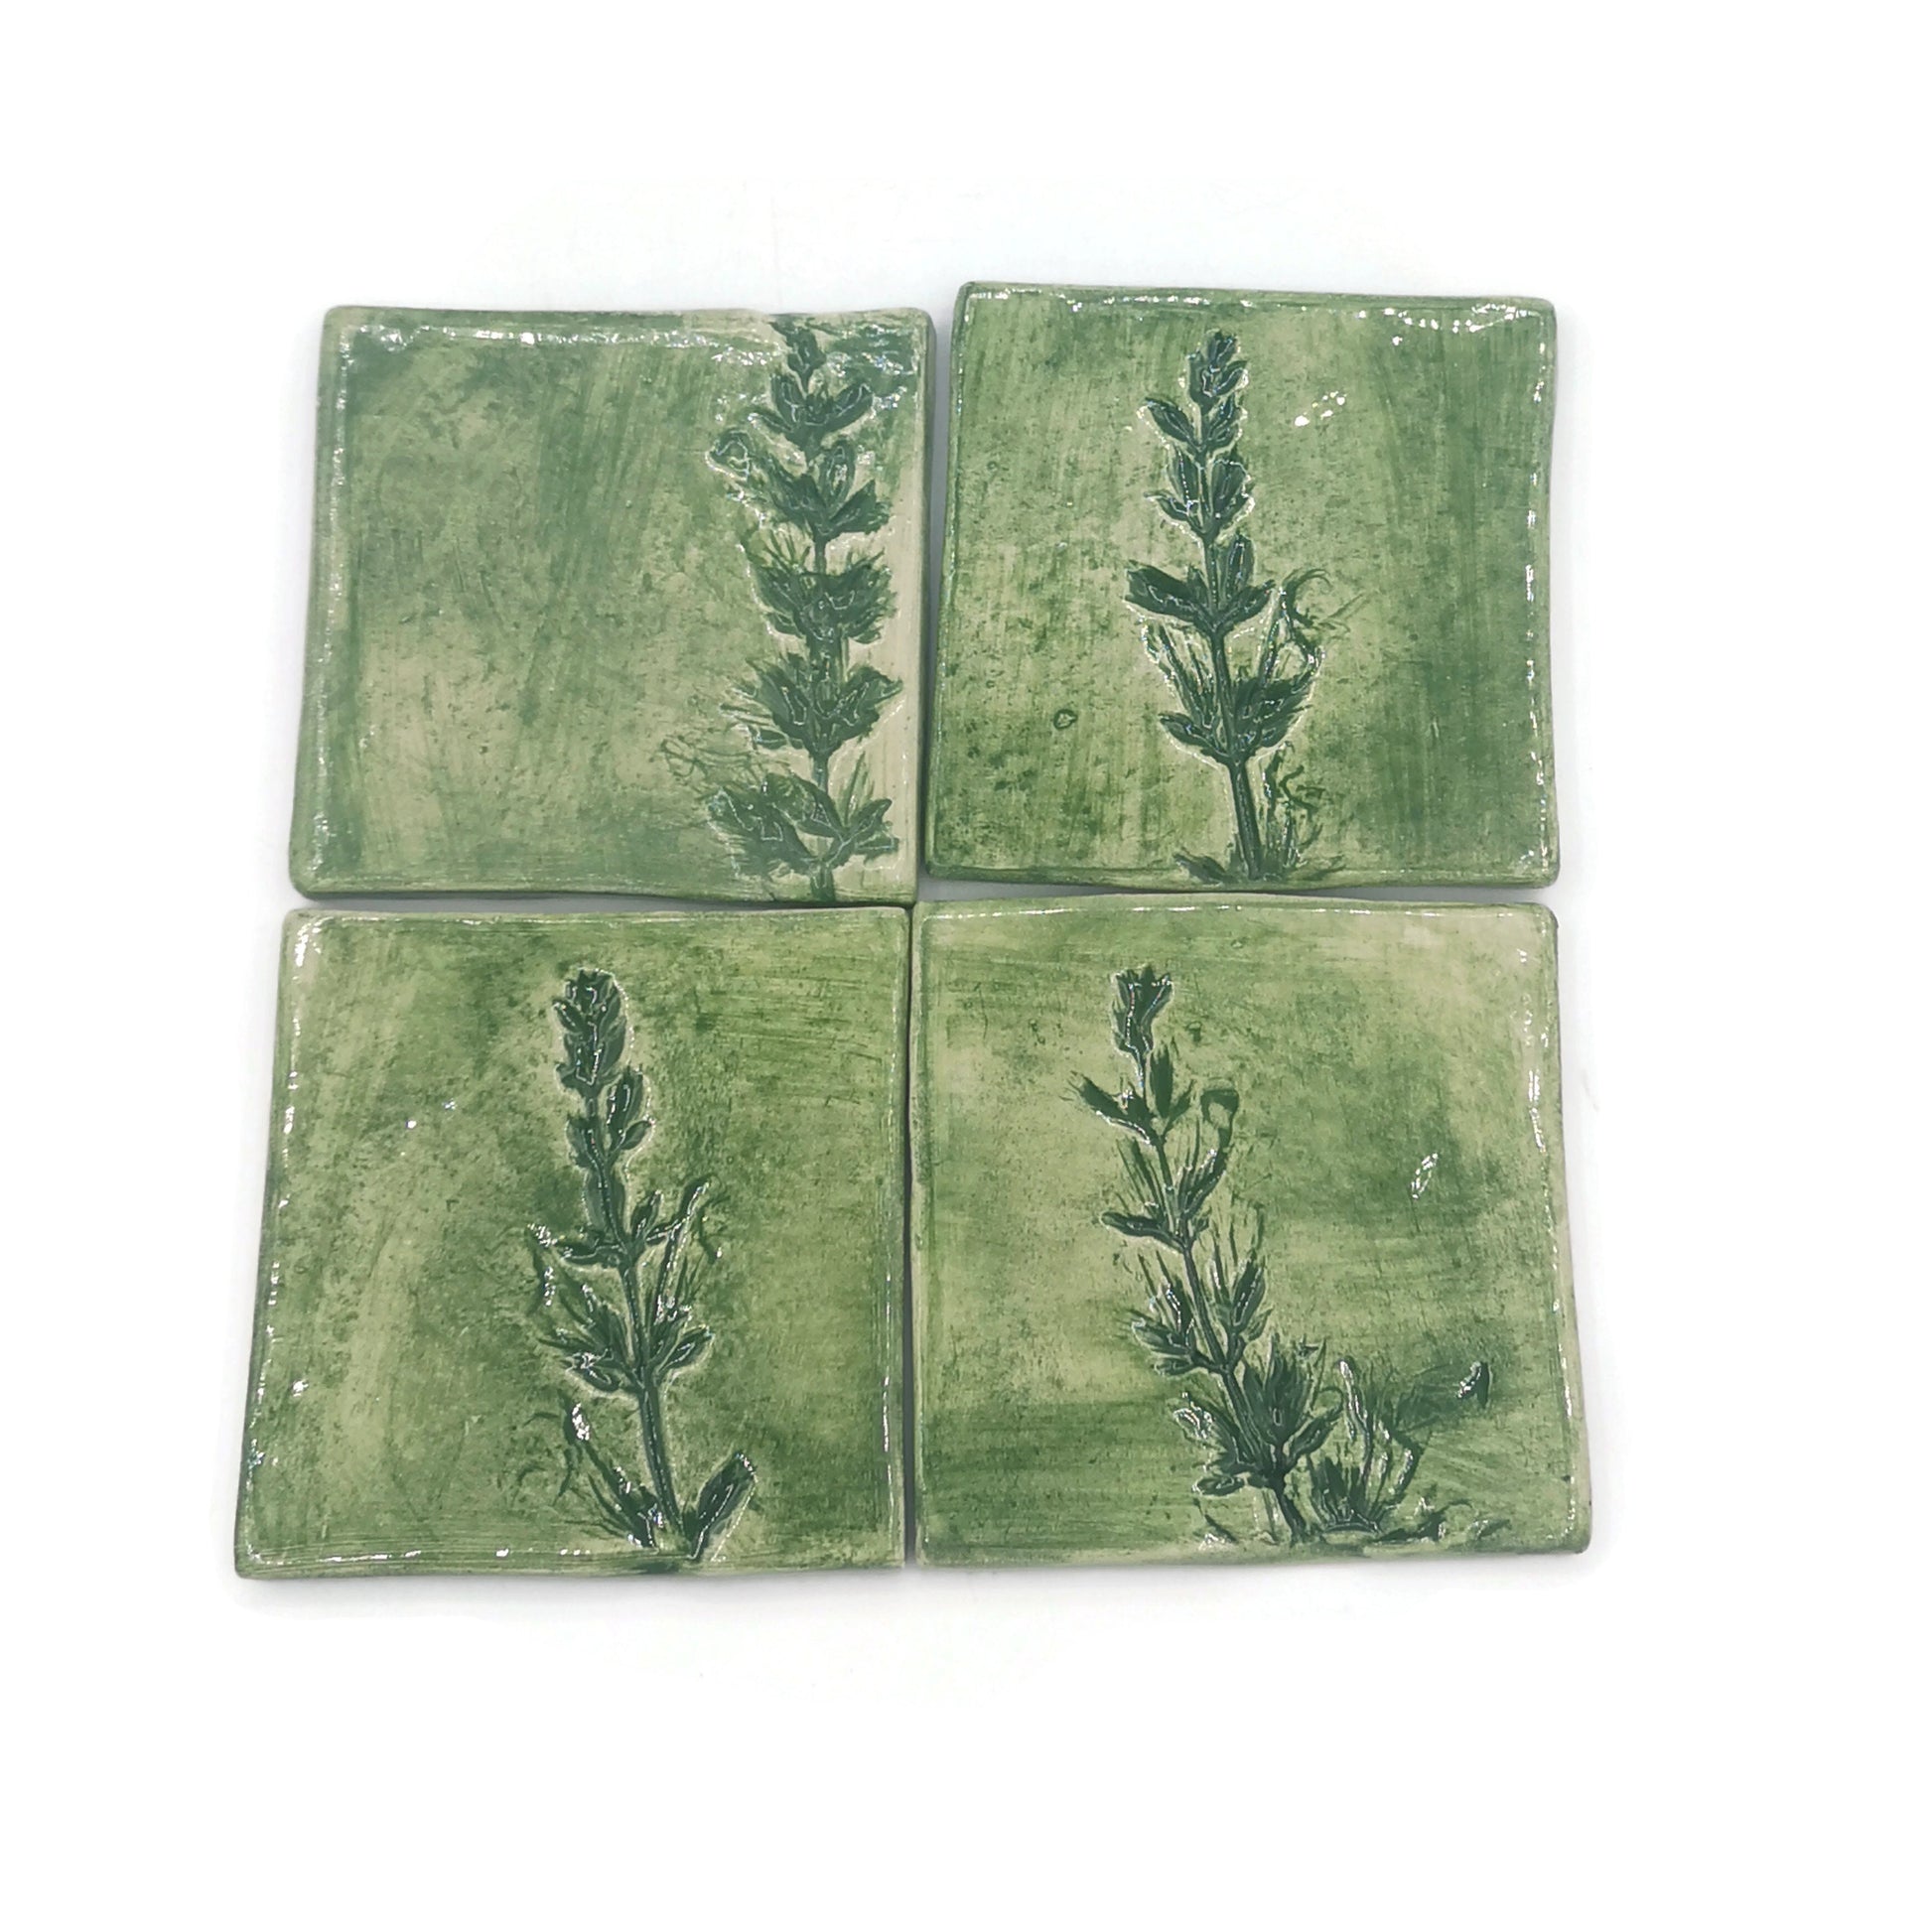 small ceramic tile, 9th anniversary gift for wife, sage flower wall art, birthday gifts for plant lover, plant dad gift, Secret Sister Gifts - Ceramica Ana Rafael